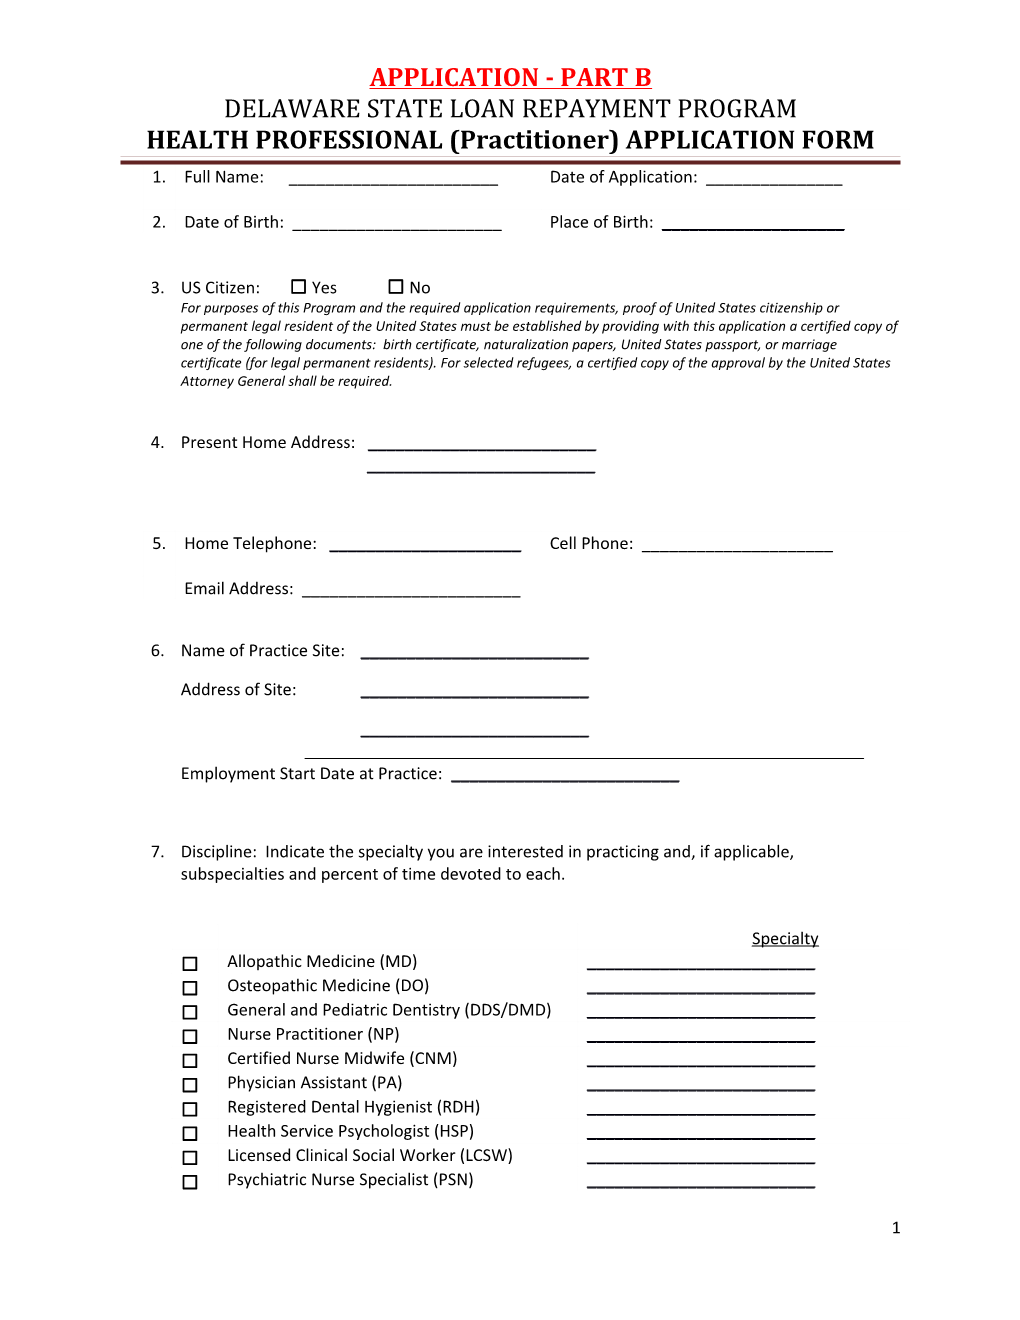 HEALTH PROFESSIONAL (Practitioner) APPLICATION FORM